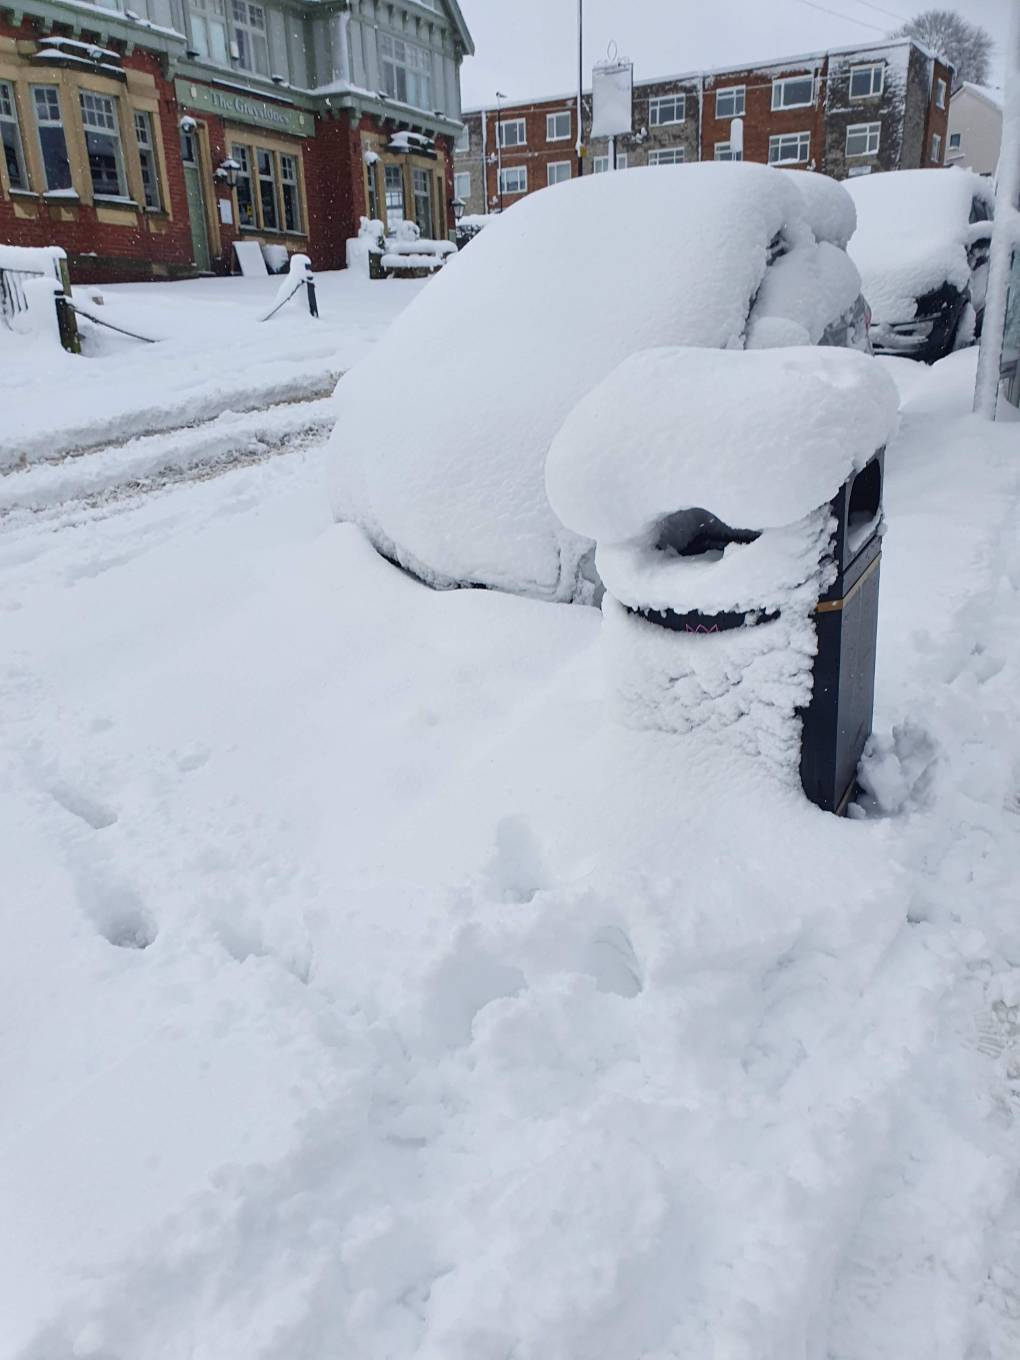 Cars and bins buried Sheffield, ,, sent by rupertwilson20